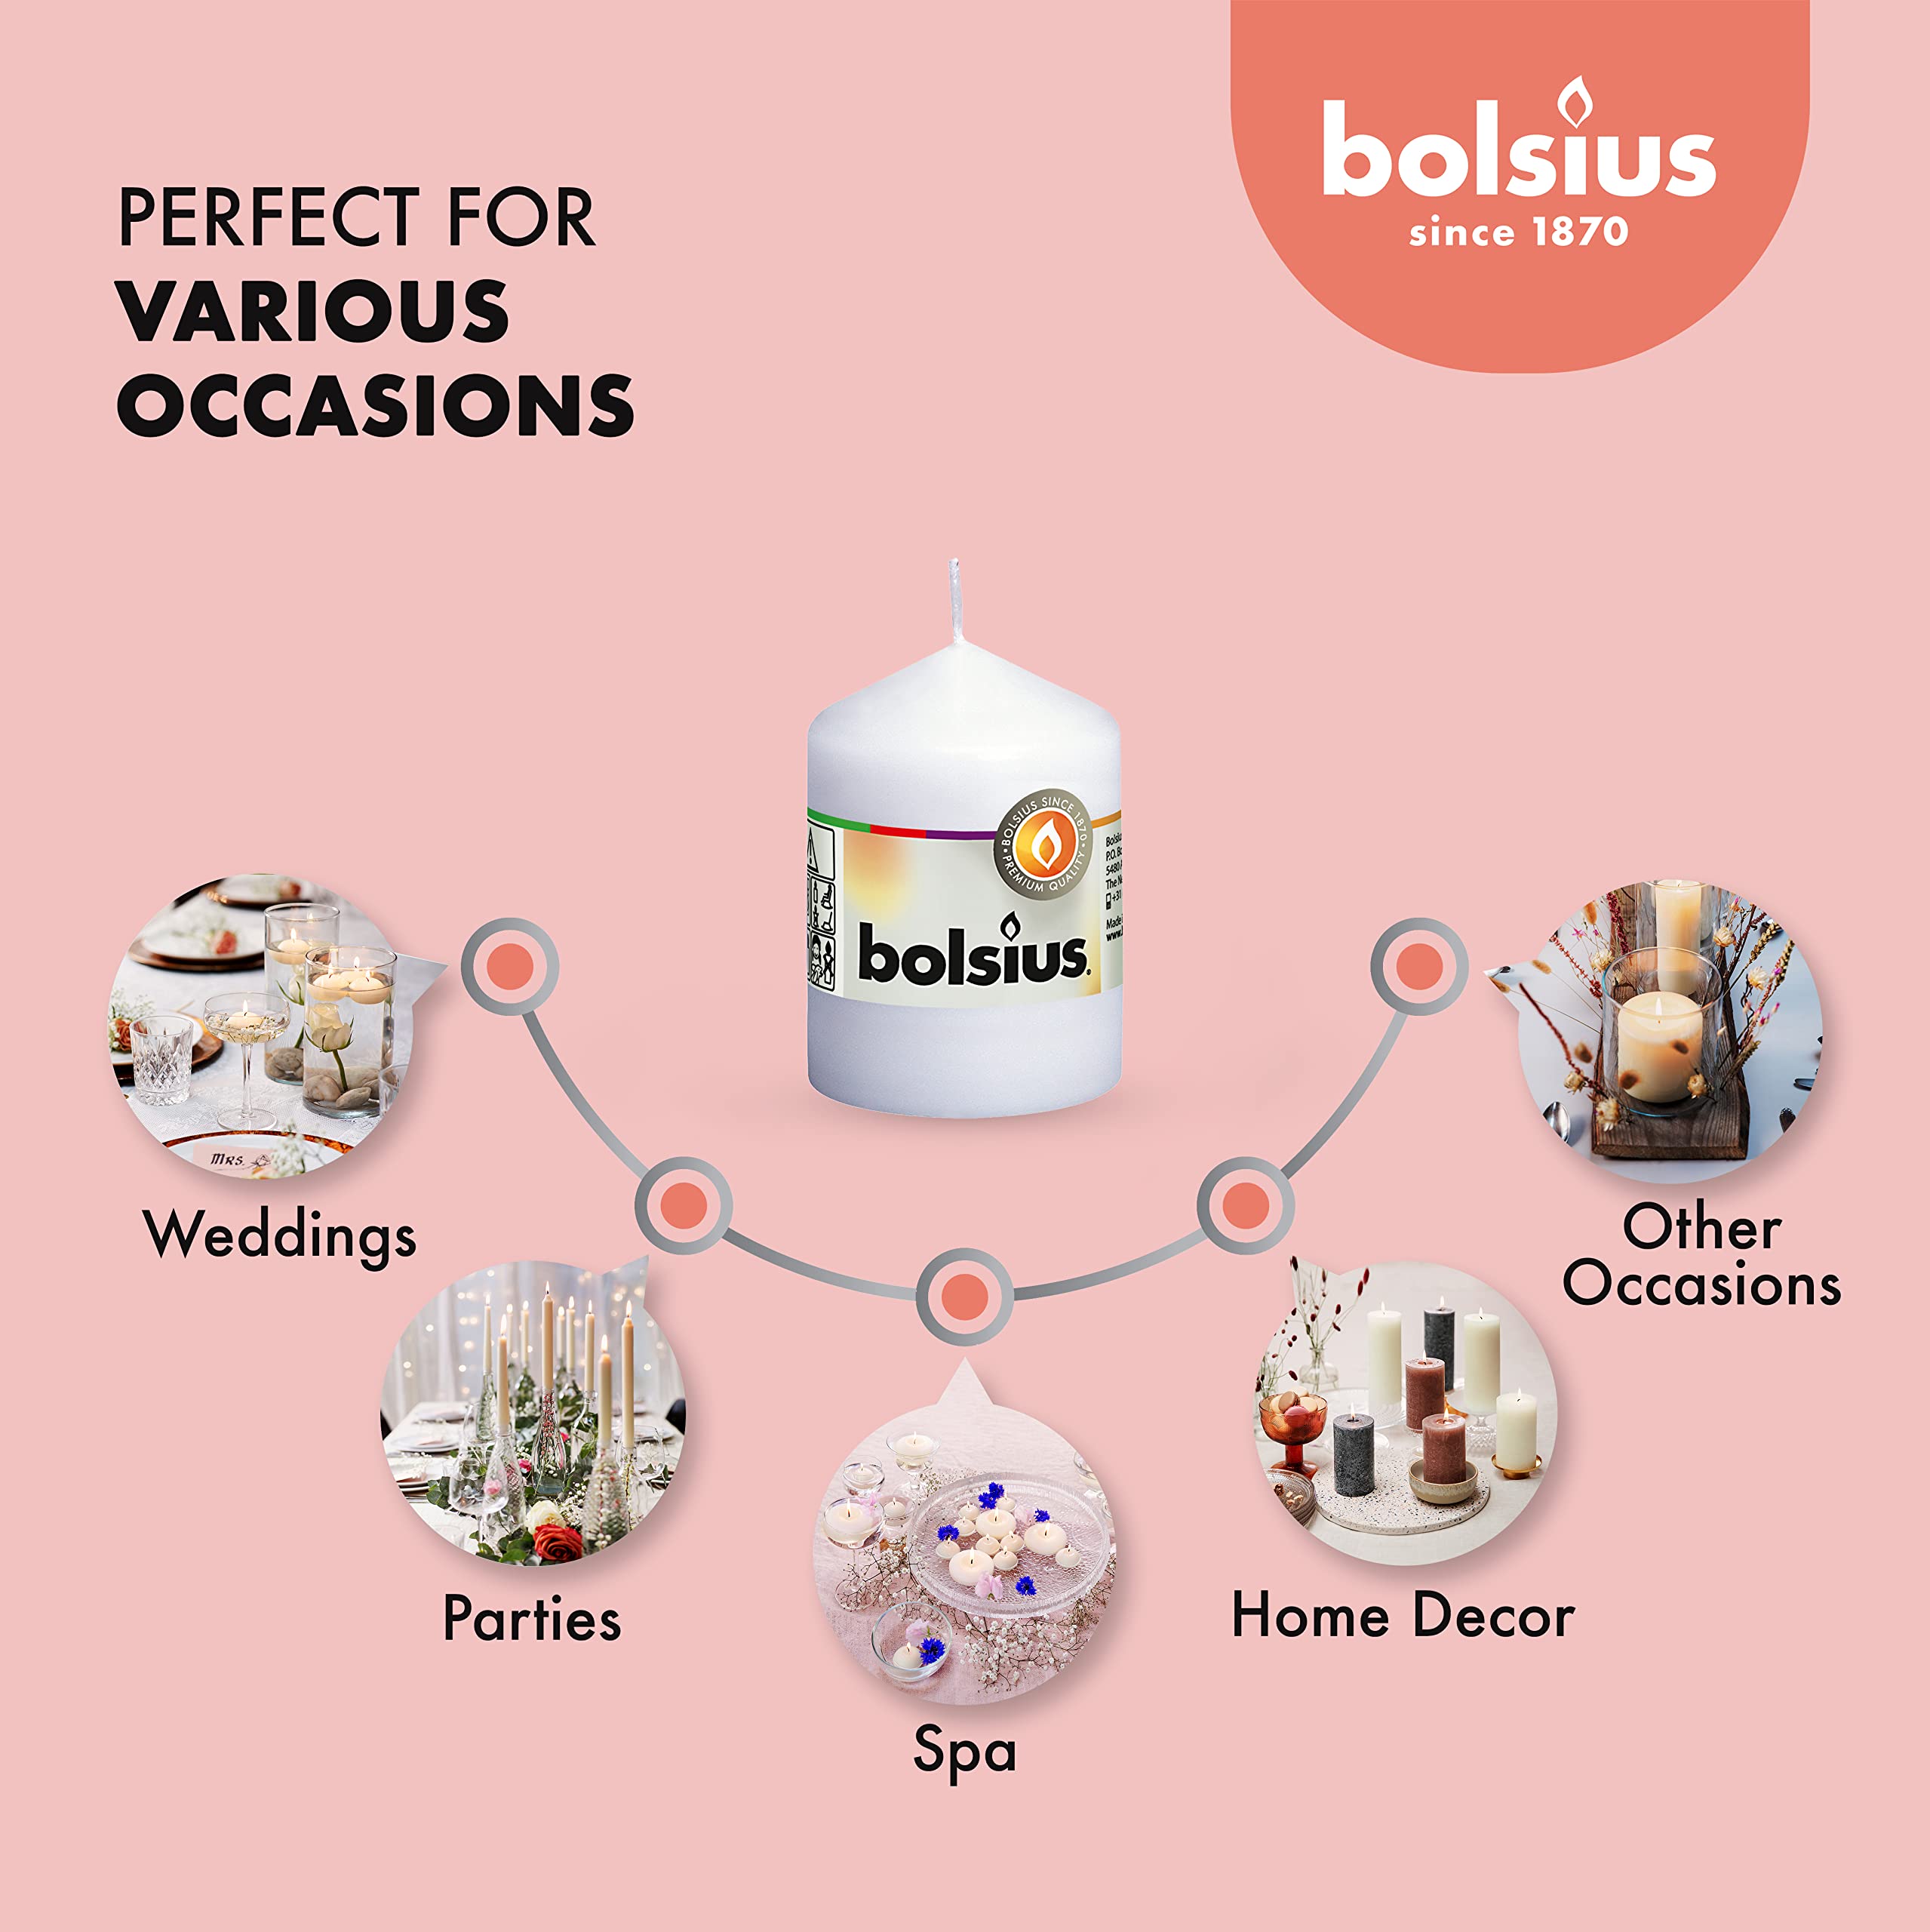 BOLSIUS 10 Pillar Candles - 2.25 x 3.25 Inches - Premium European Quality - Individually Wrapped  - Like New